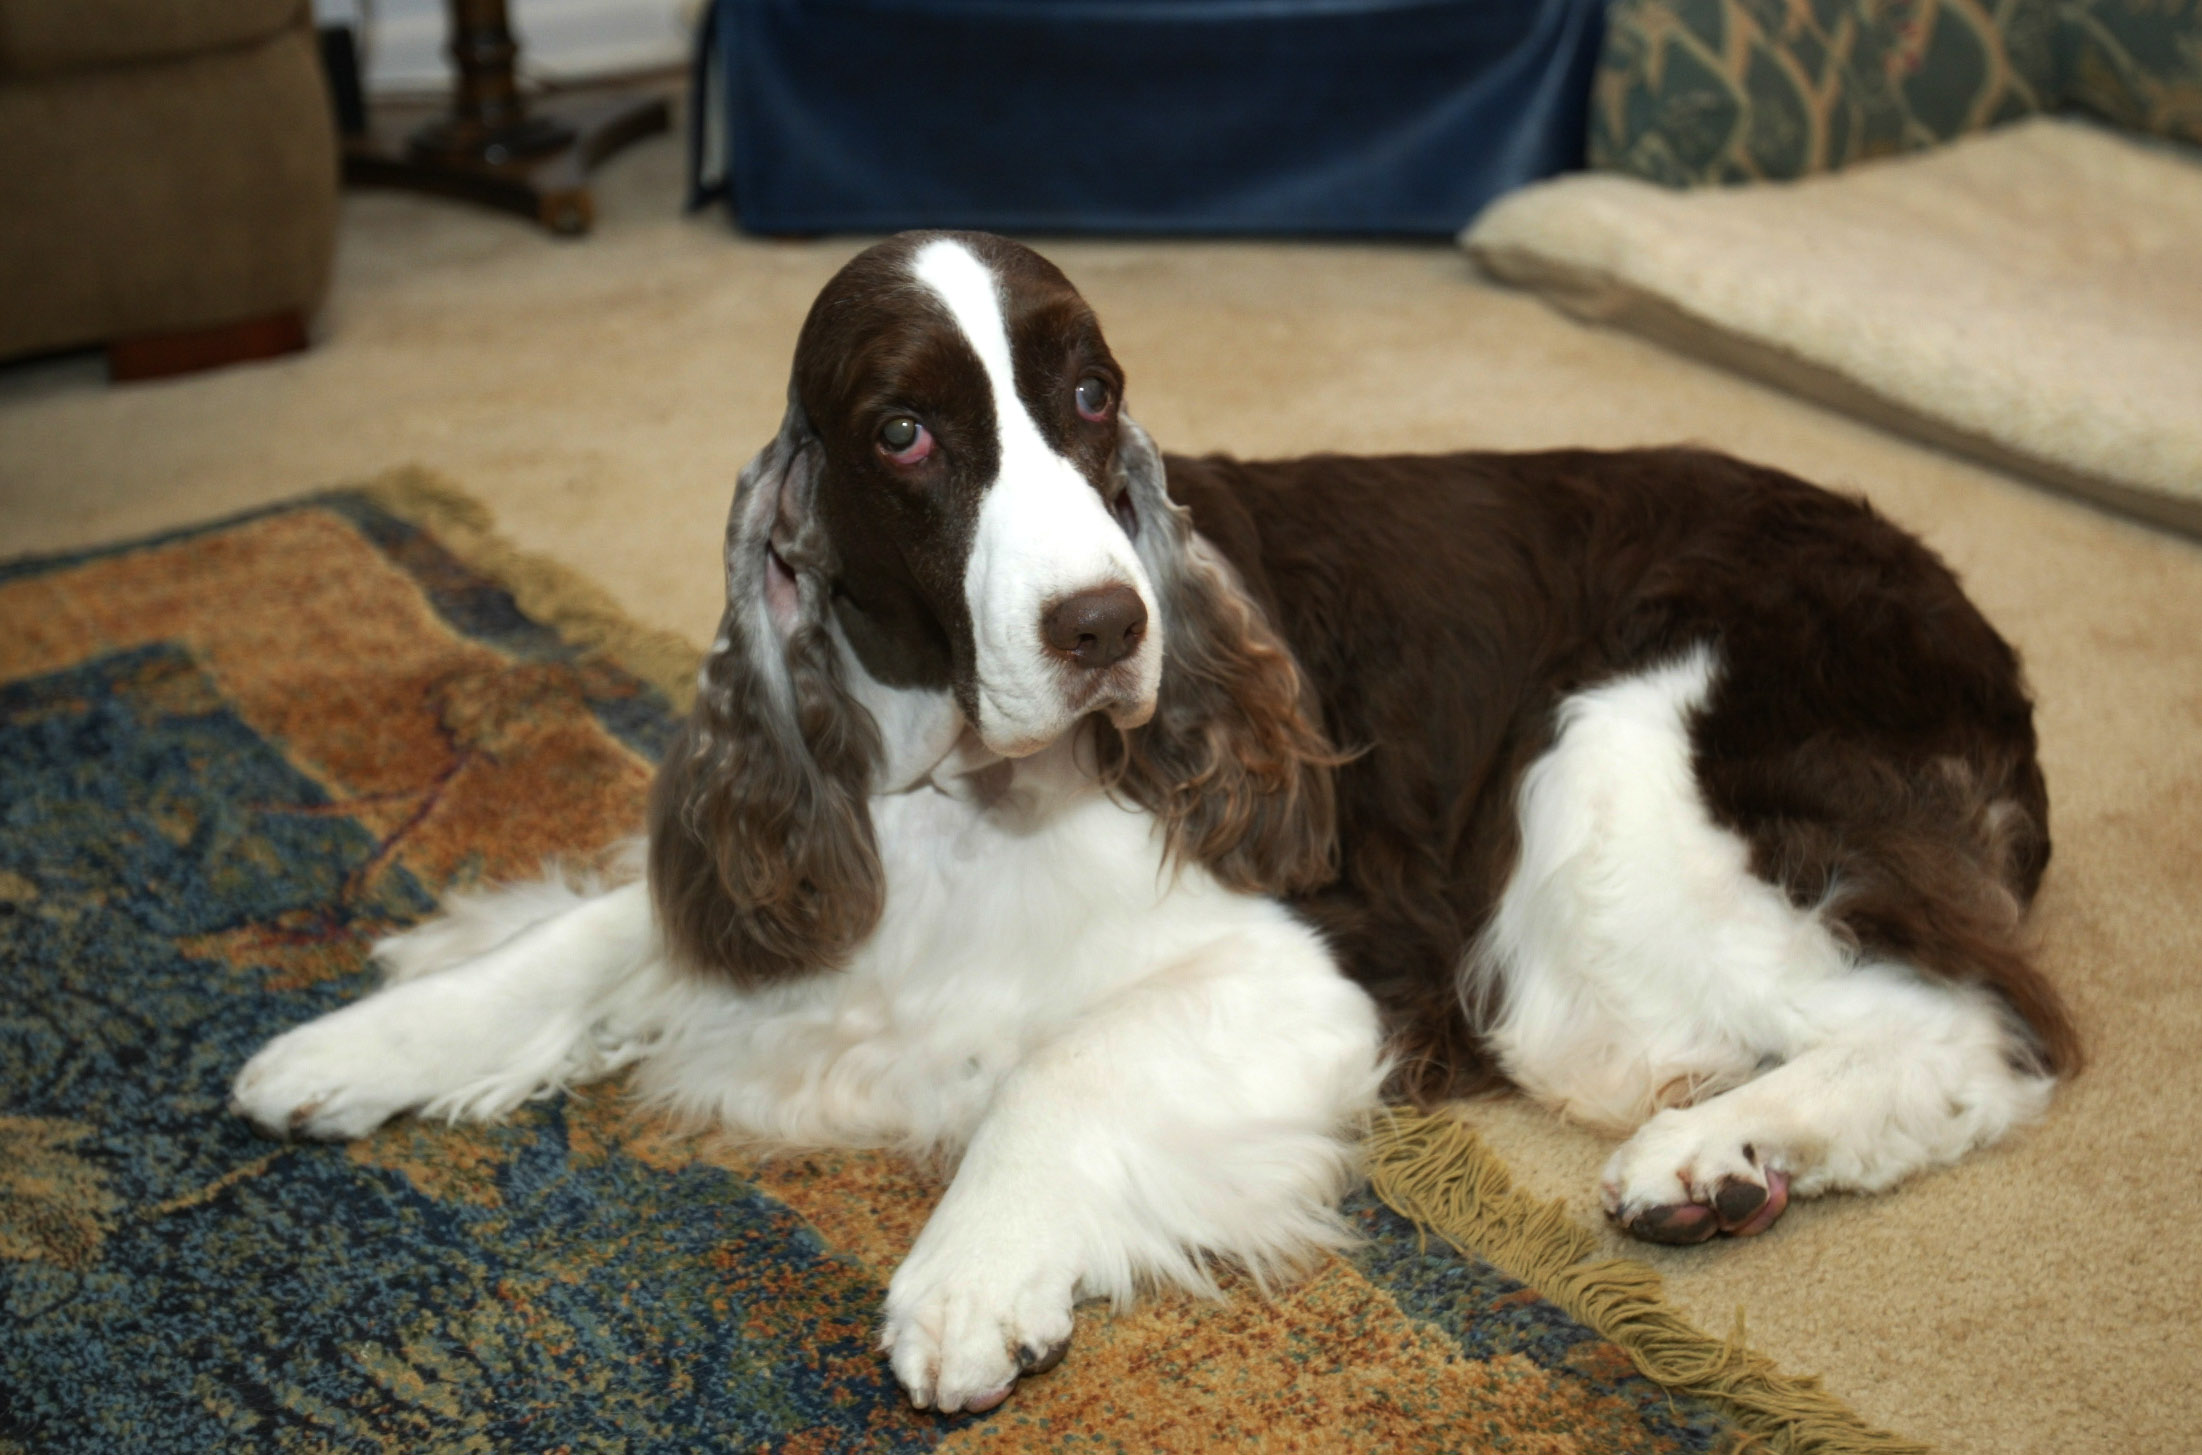 1/5/2004 -- Newark, Del. -- Samantha, an English Springer Spaniel, won Best in Show at the 2000 Westminster dog show. Today, at 9 years old, she is enjoying a quiet retirement.